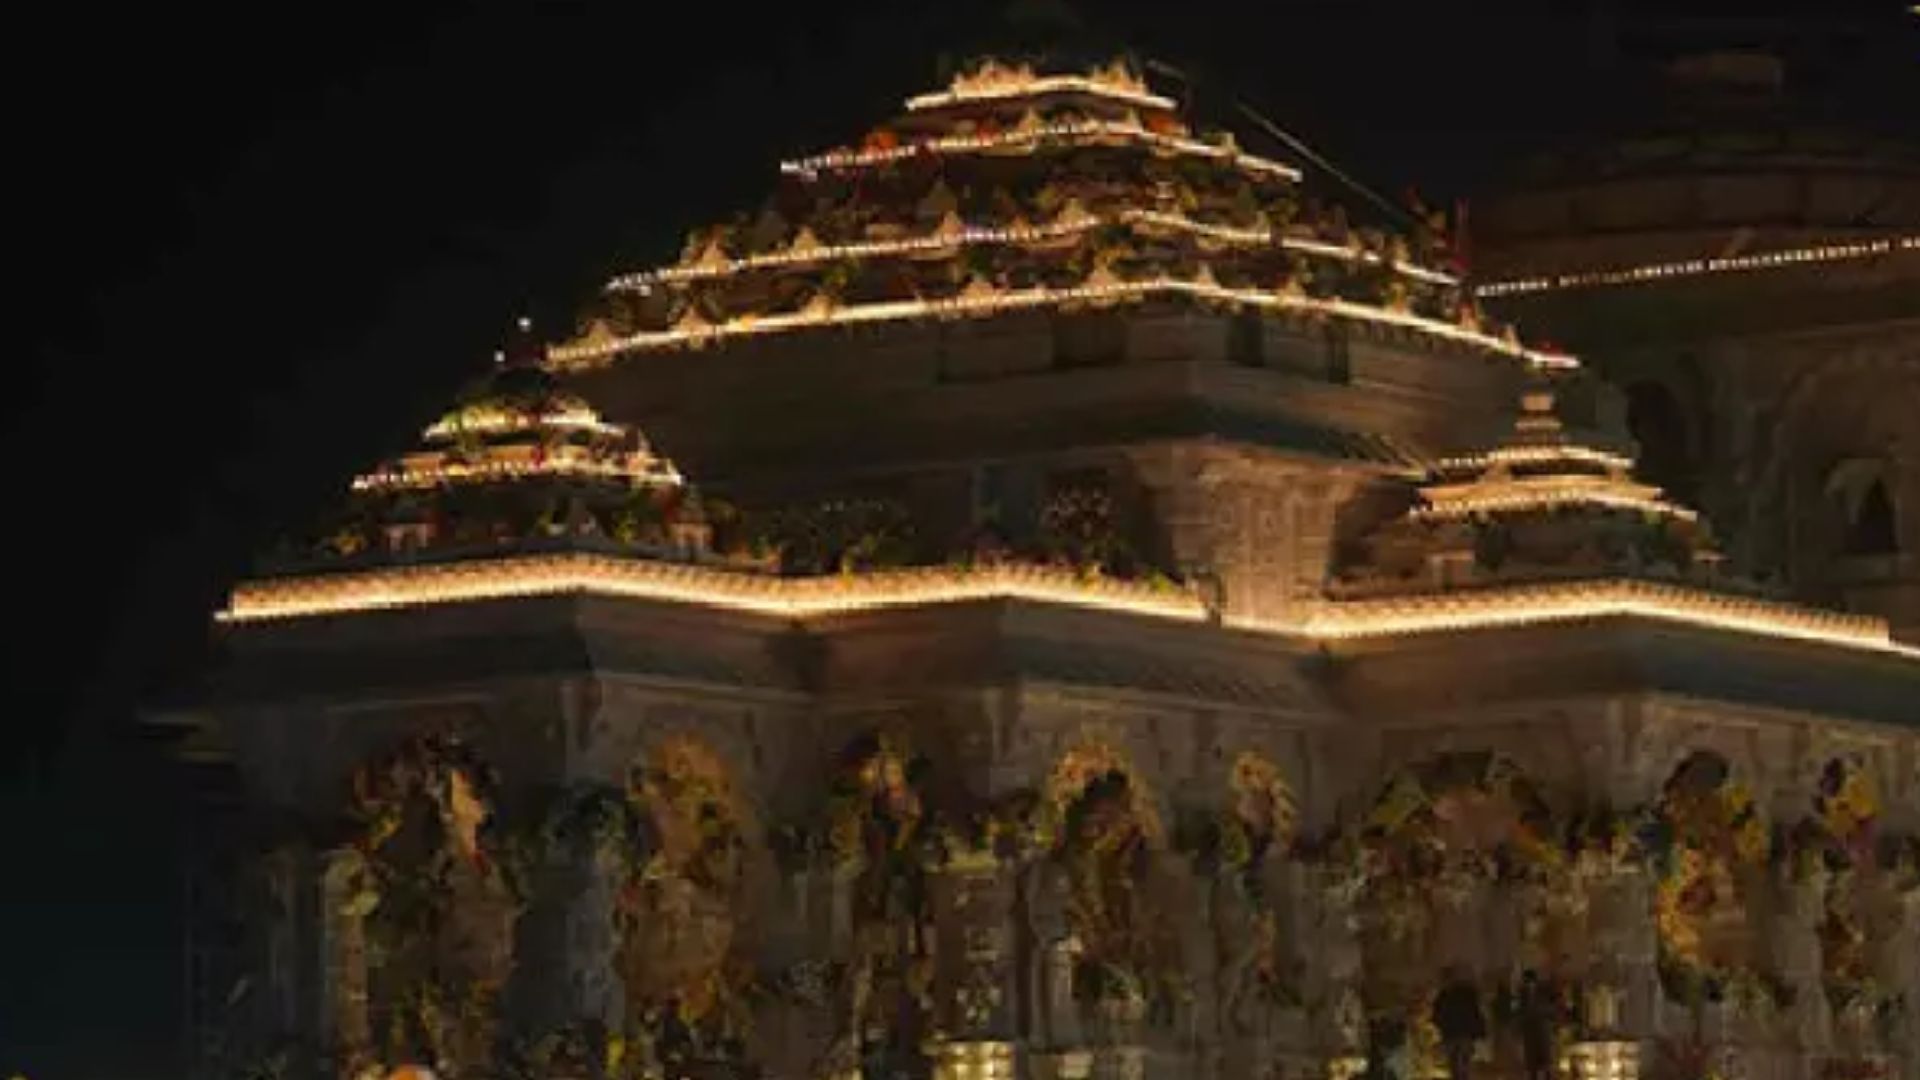 Ayodhya poised to make history with magnificent ‘Pran Pratistha’ of Ram Lalla